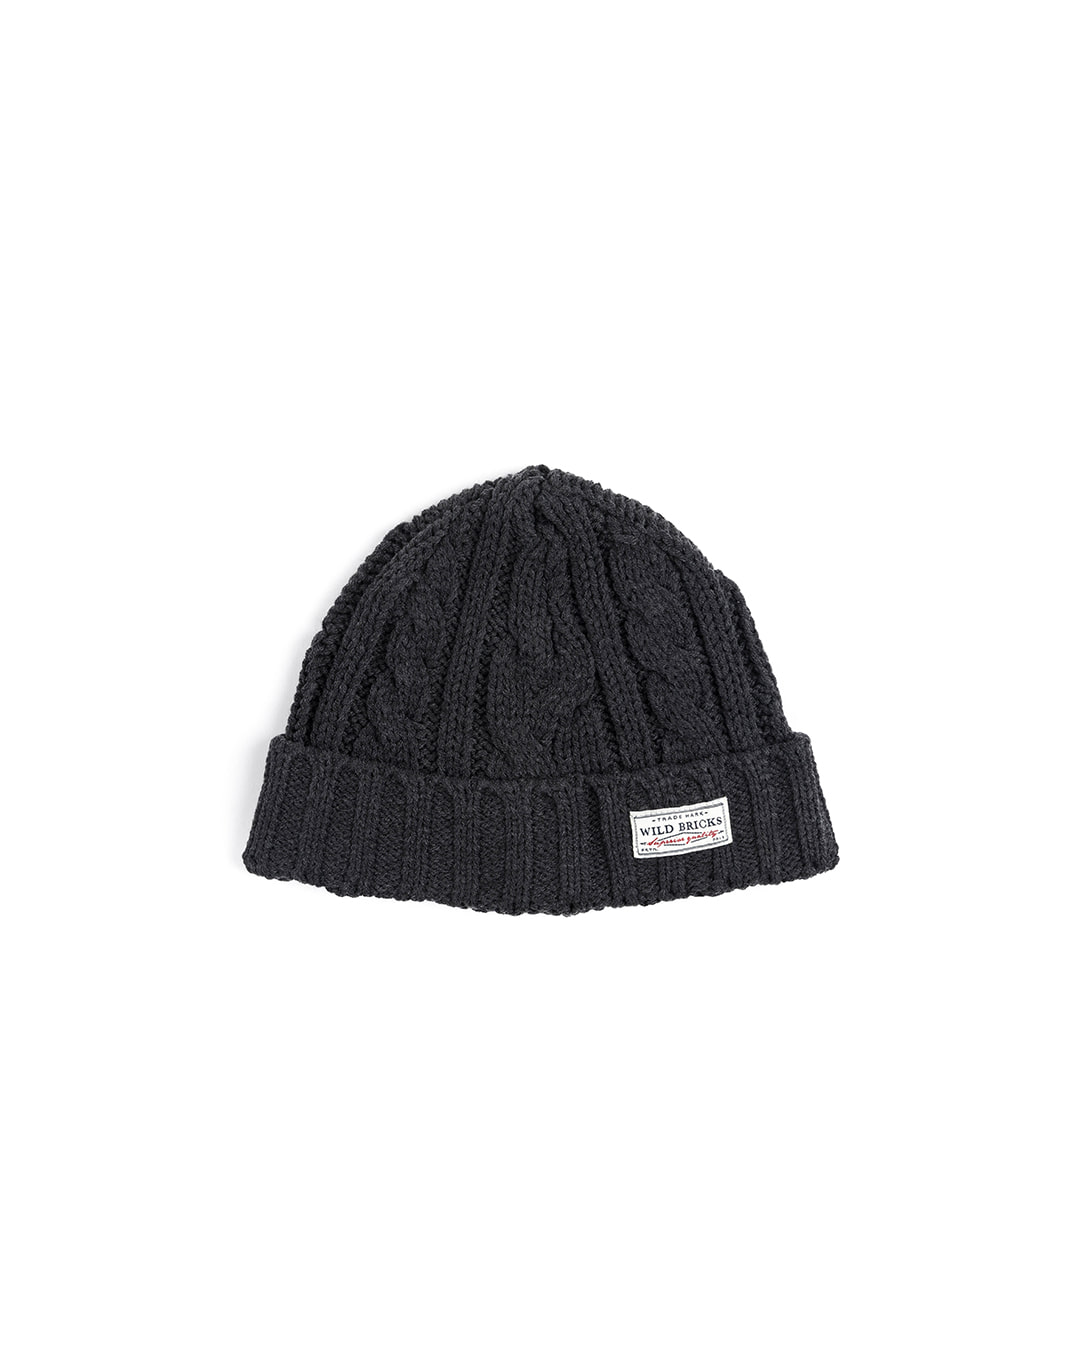 AP CABLE WATCH CAP (charcoal)